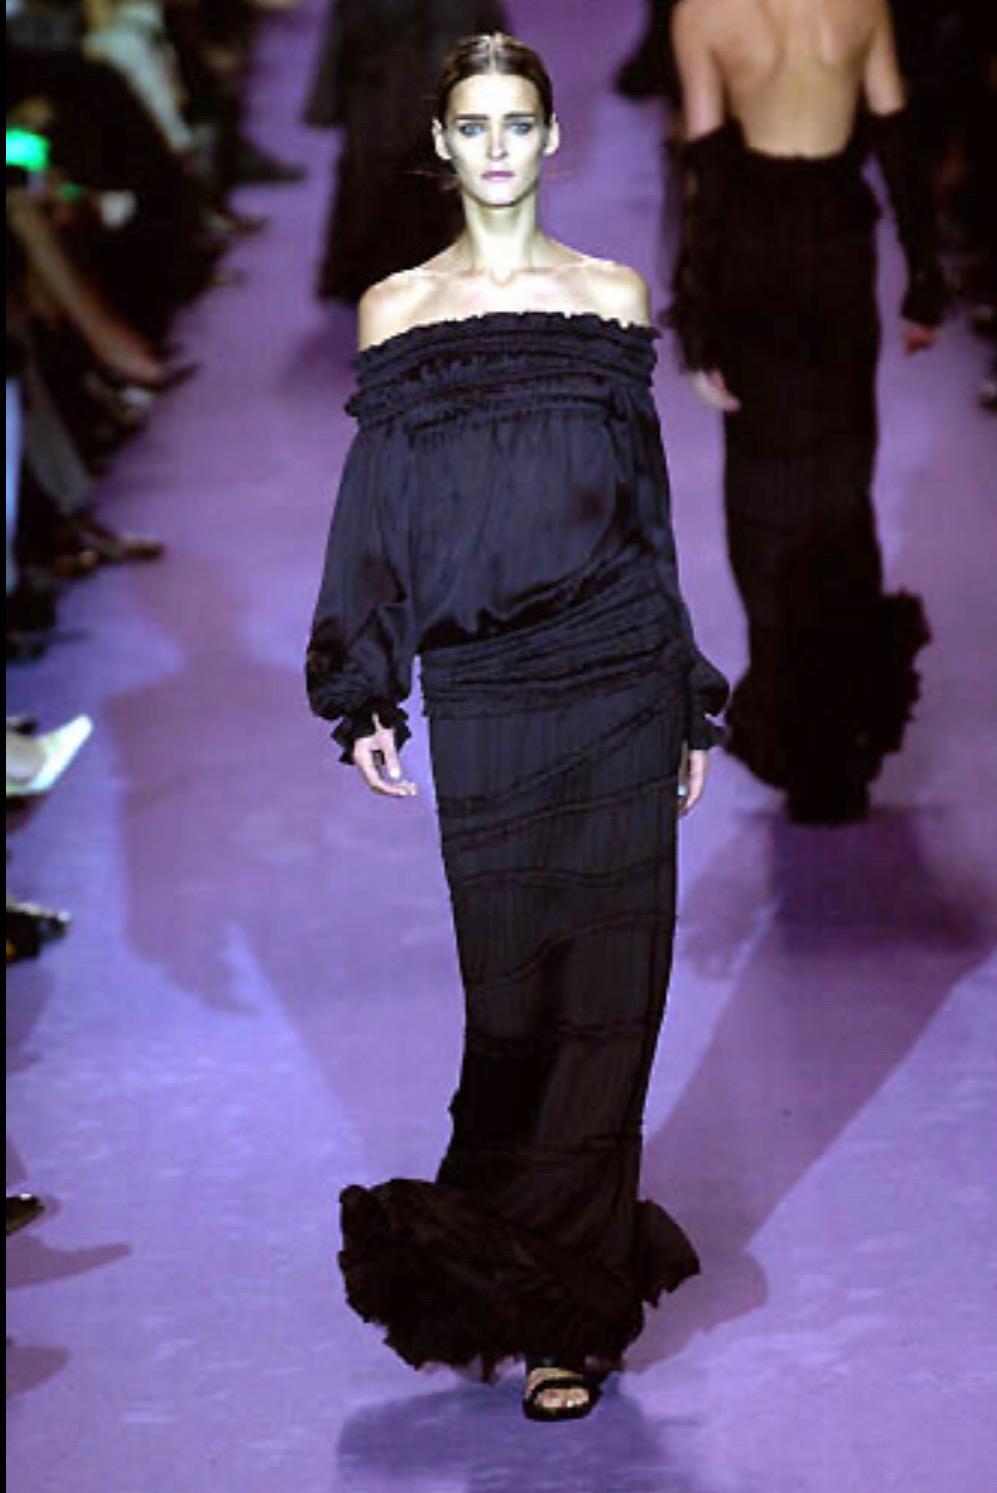 Presenting a fabulous black pheasant-style Yves Saint Laurent Rive Gauche top, designed by Tom Ford. From the Fall/Winter 2001 collection, this top debuted as part of look 20 modeled by Caroline Ribeiro and was also highlighted in the season's ad